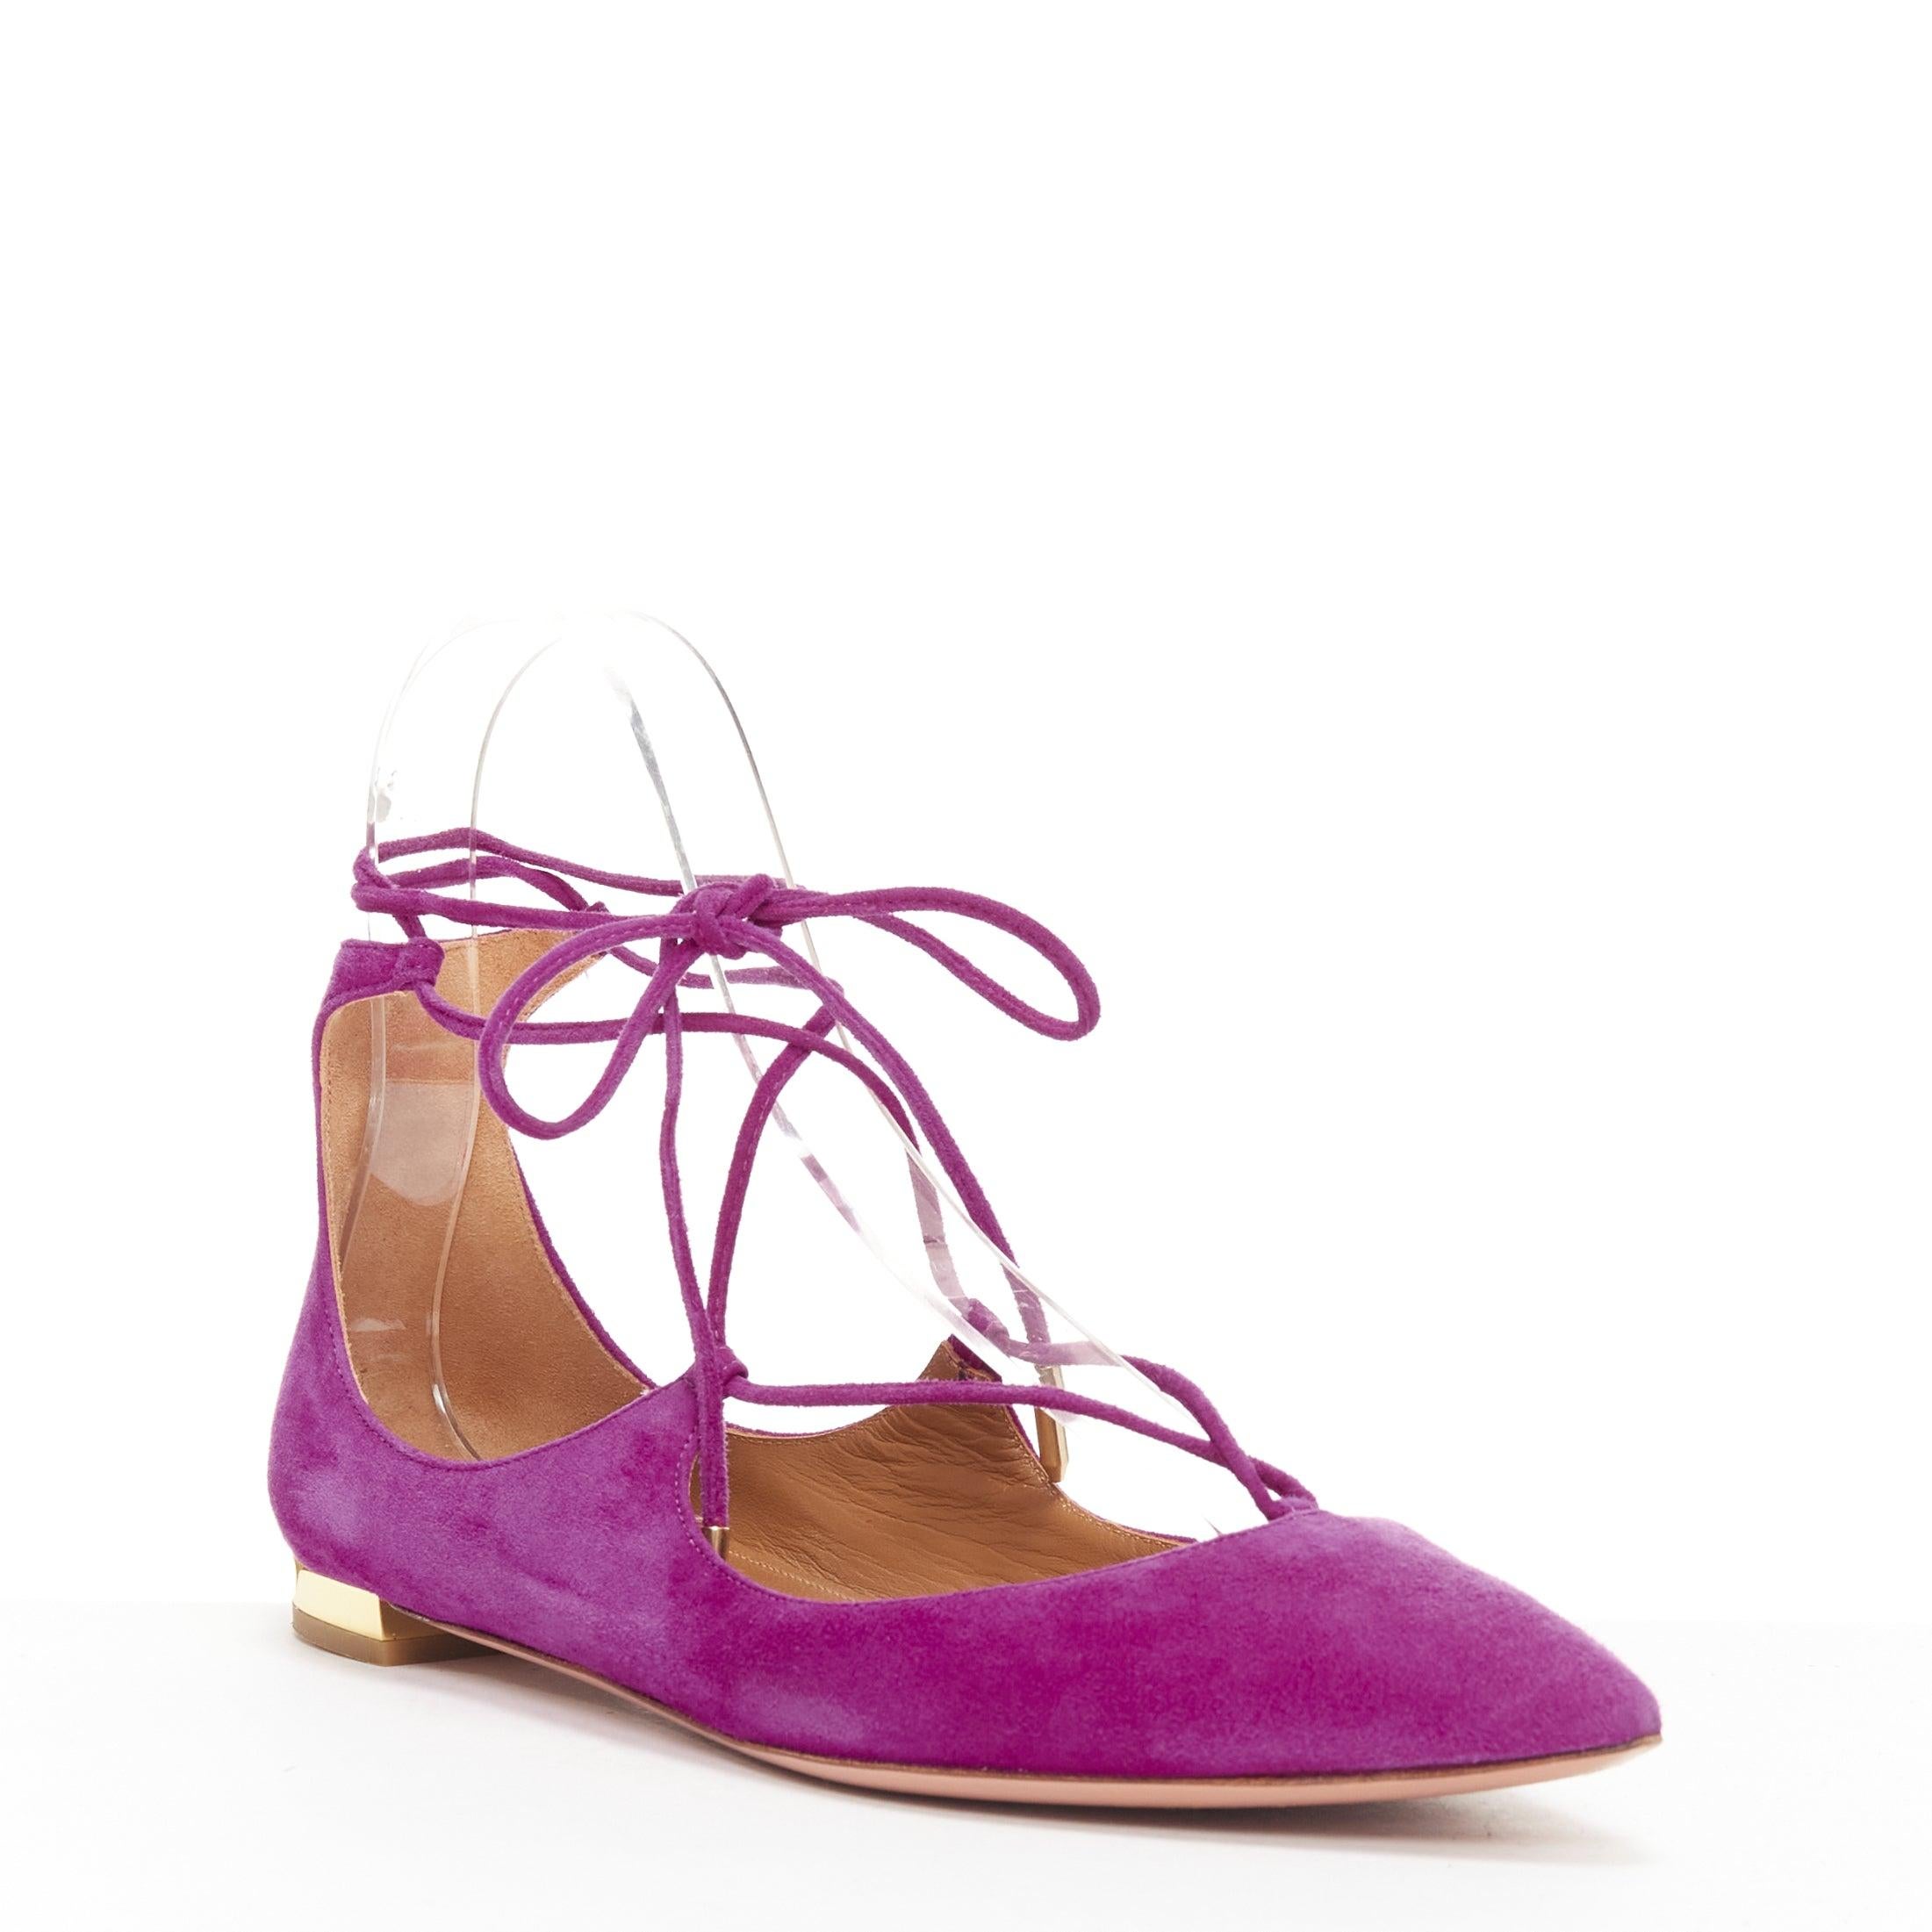 AQUAZZURA Belgravia purple suede leather pointy lace up gold heel flats EU37.5
Reference: NILI/A00059
Brand: Aquazzura
Model: Belgravia
Material: Suede
Color: Purple, Gold
Pattern: Solid
Closure: Lace Up
Lining: Brown Leather
Extra Details: Gold low